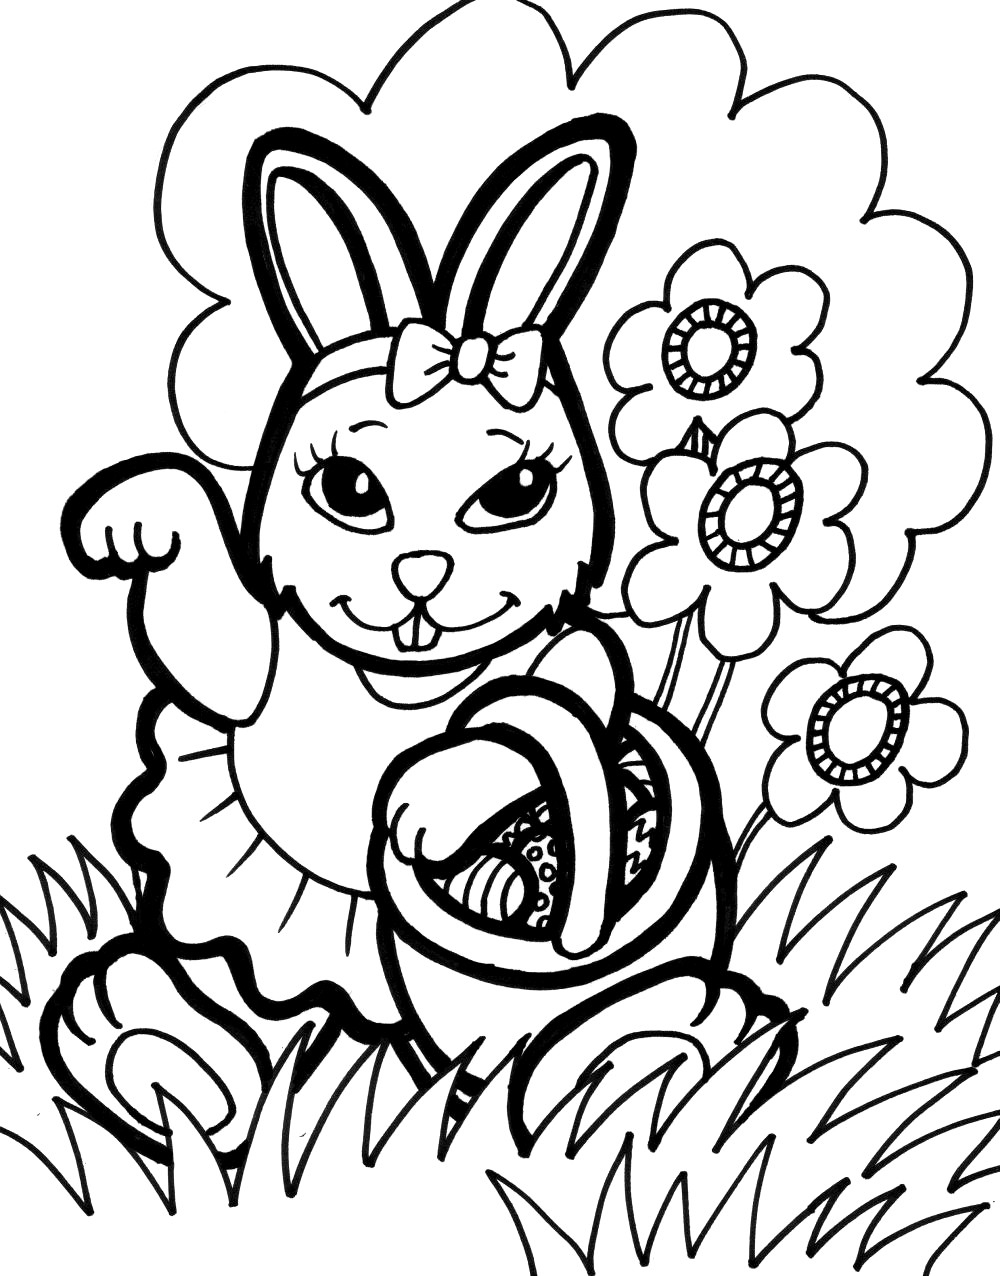 Cute Bunny Rabbit Drawing Free Download On ClipArtMag